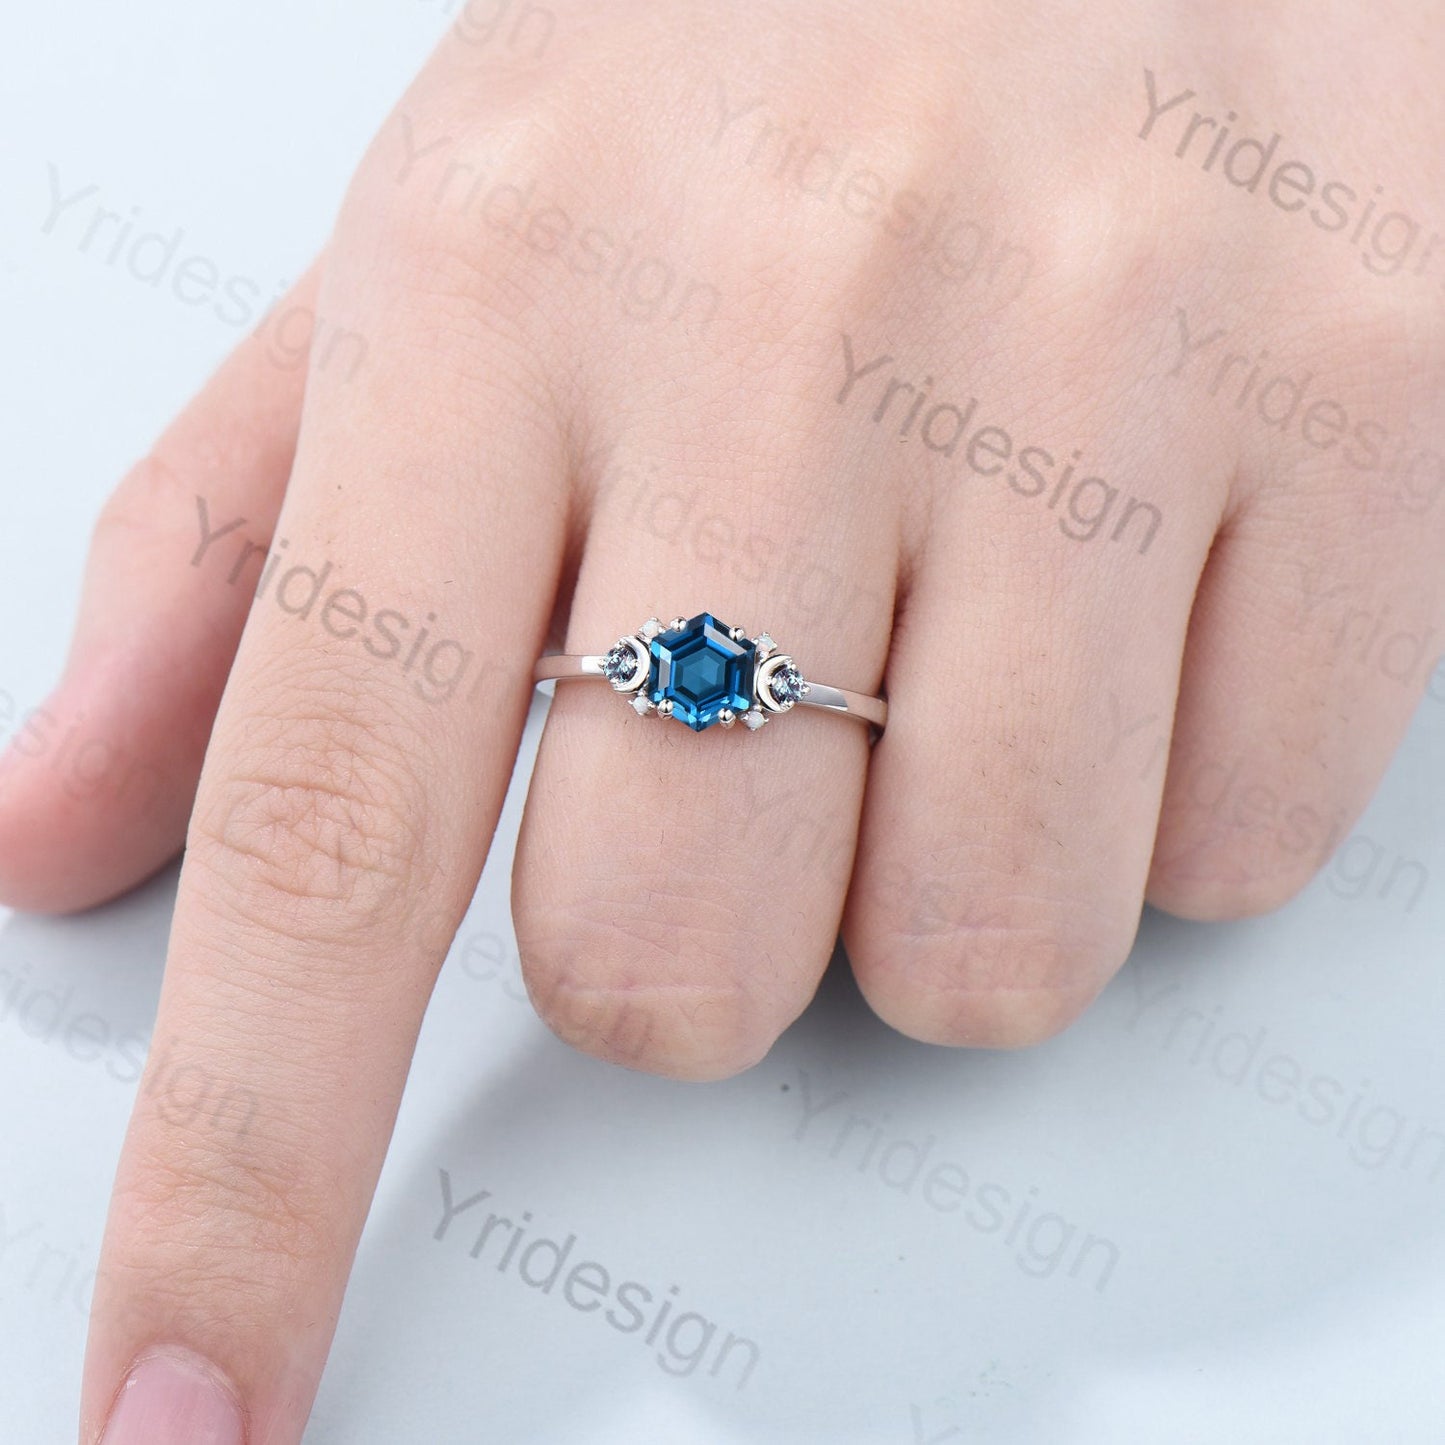 Vintage Moon London Blue Topaz Ring Unique Nature Inspired  Hexagon topaz Engagement Ring Cluster Alexandrite Opal Wedding Ring gift for her - PENFINE